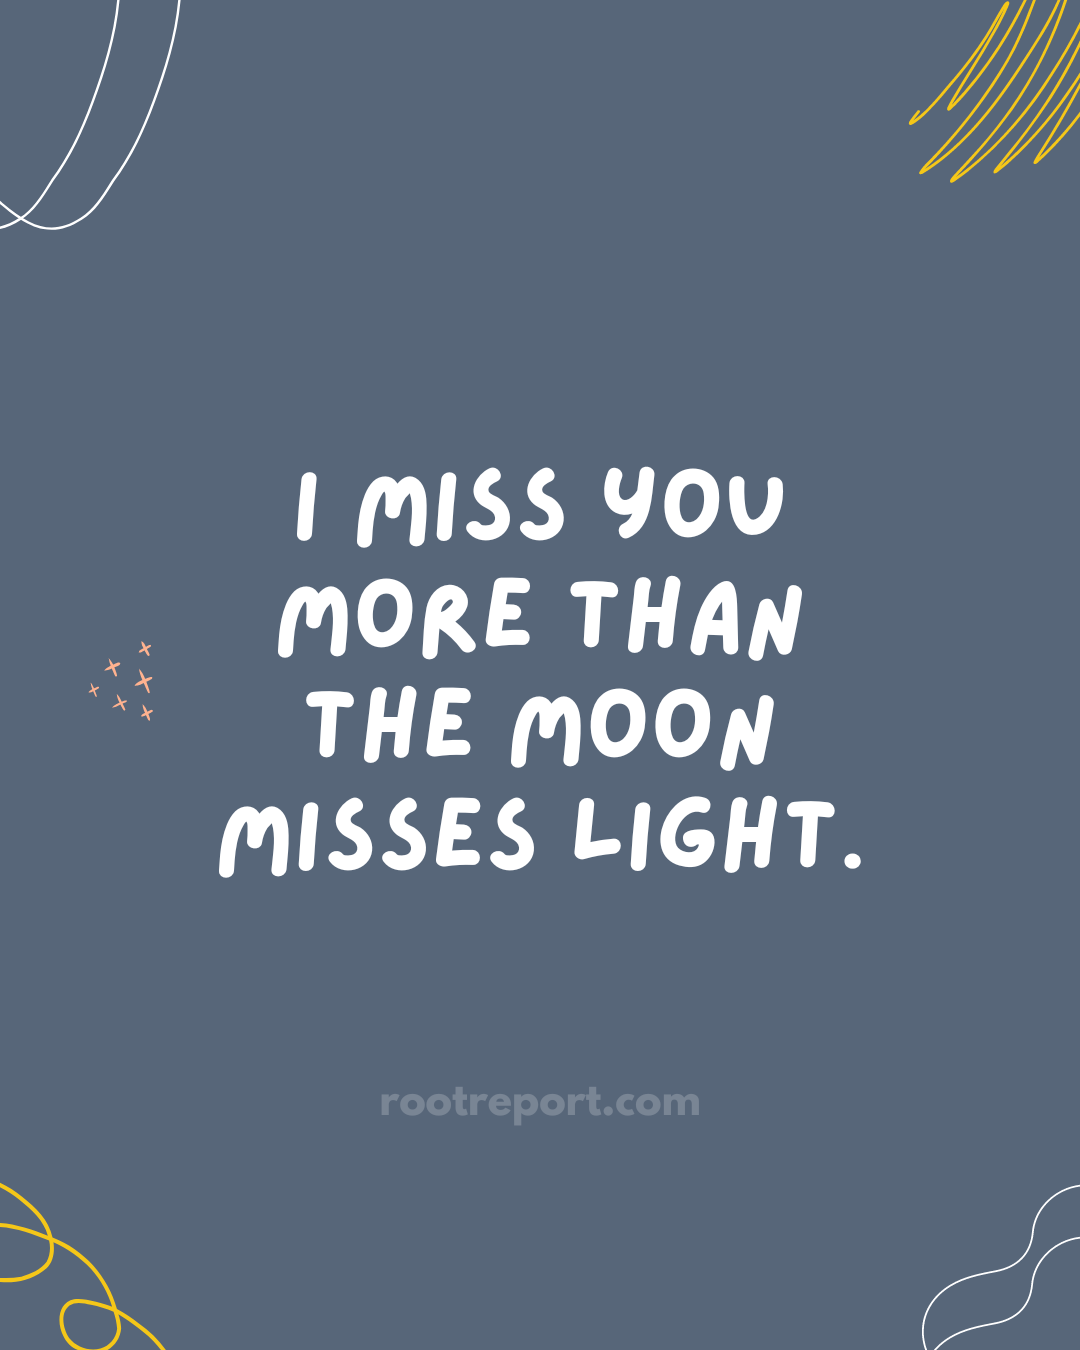 I miss you more than the moon misses light.